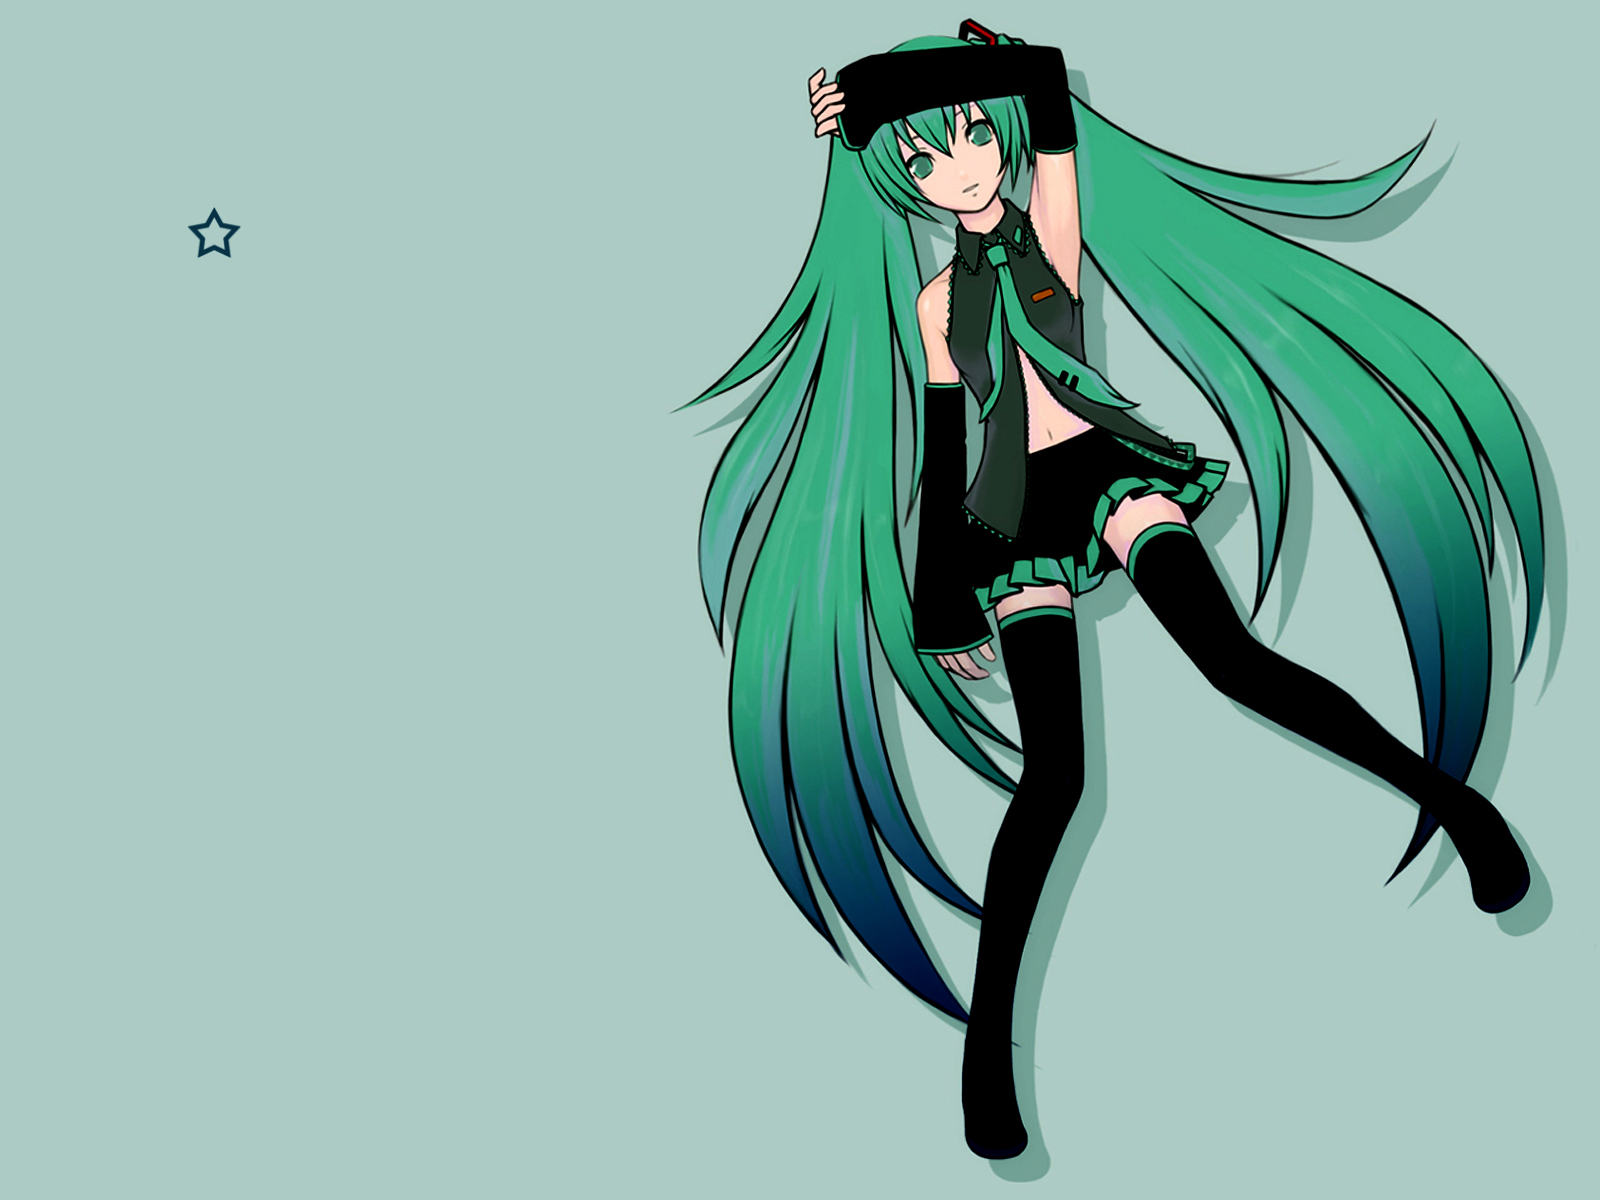  Miku Sweet Anime WallpapersHigh Resolution Backgrounds for your